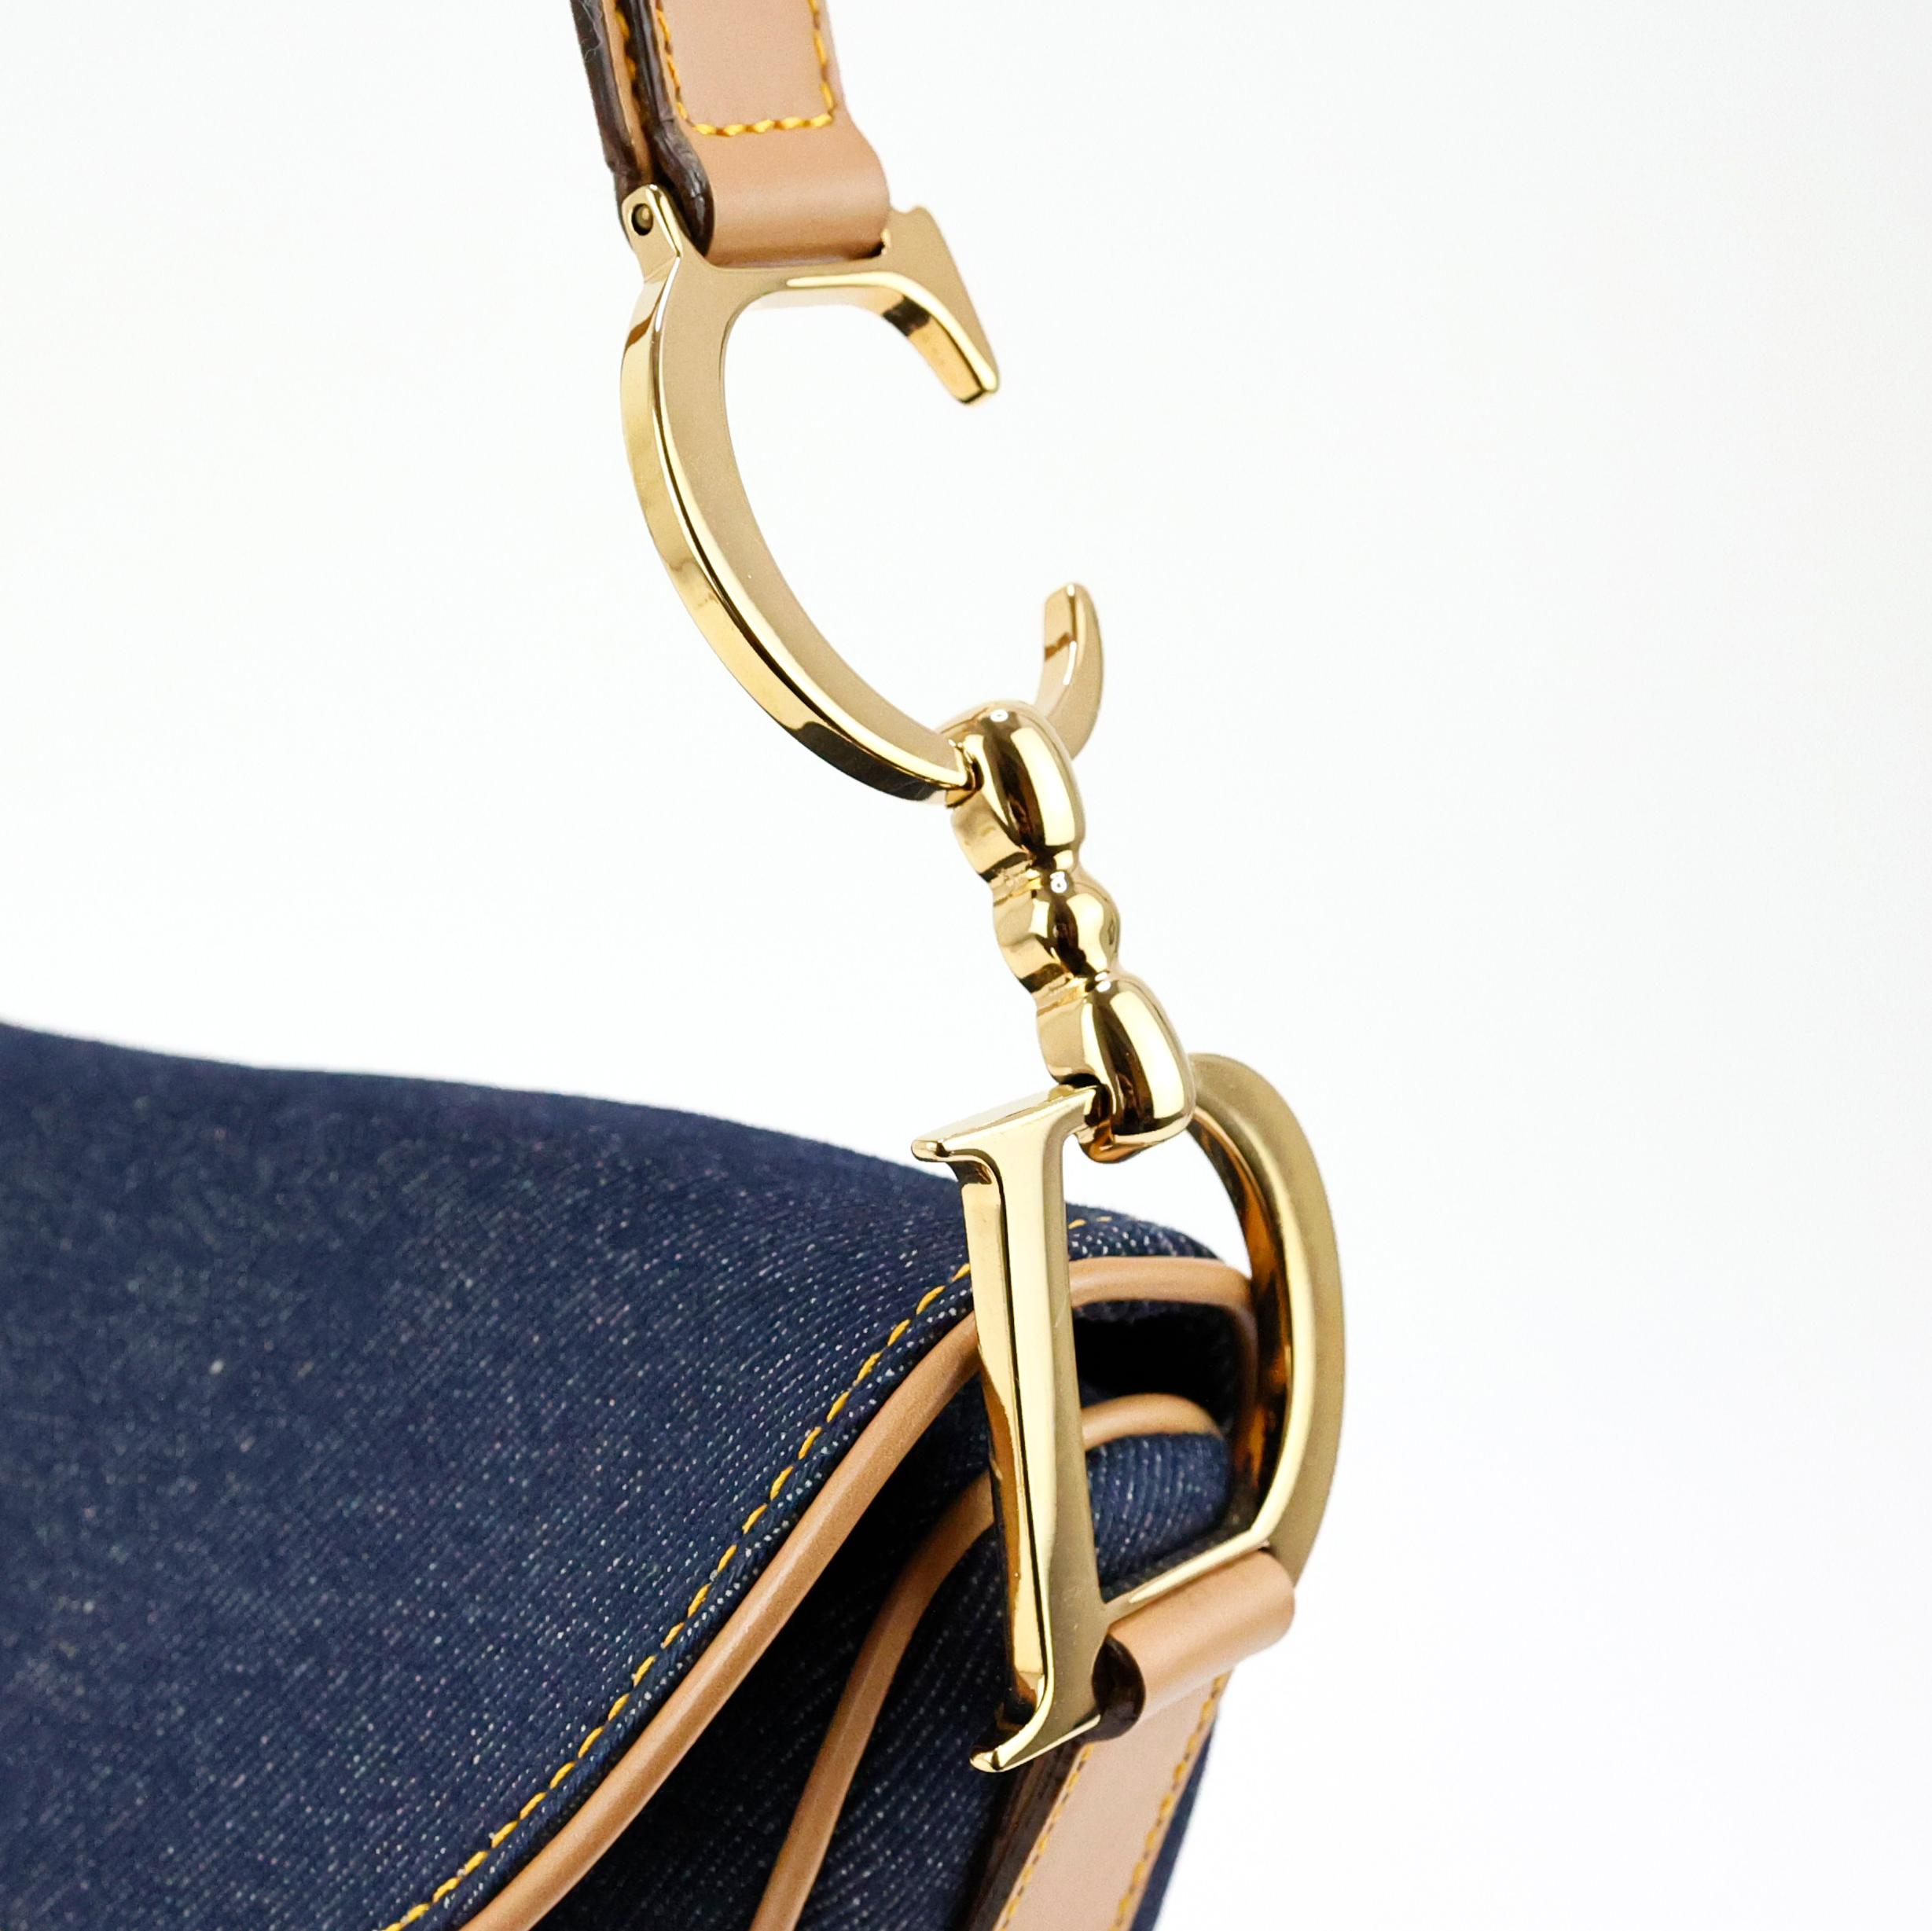 Christian Dior Denim Saddle Bag In Excellent Condition For Sale In Bressanone, IT